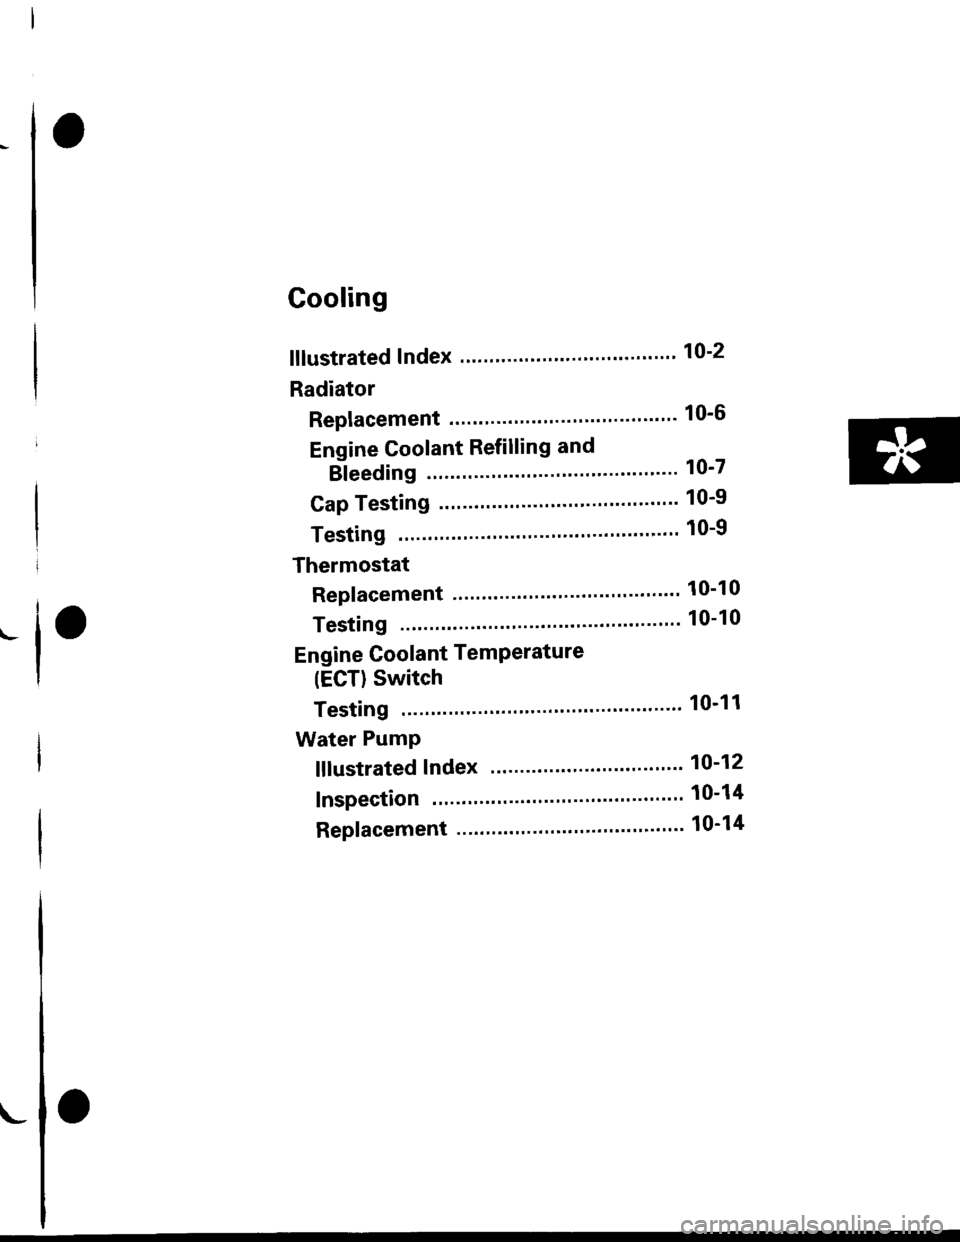 HONDA CIVIC 1996 6.G Workshop Manual Cooling
fllustrated Index ."..."... "" 10-2
Radiator
Replacement ........."..."
Engine Coolant Refilling and
Bleeding
Cap Testing
Testing
Thermostat
Replacement .................
Testing
10-6
10-7